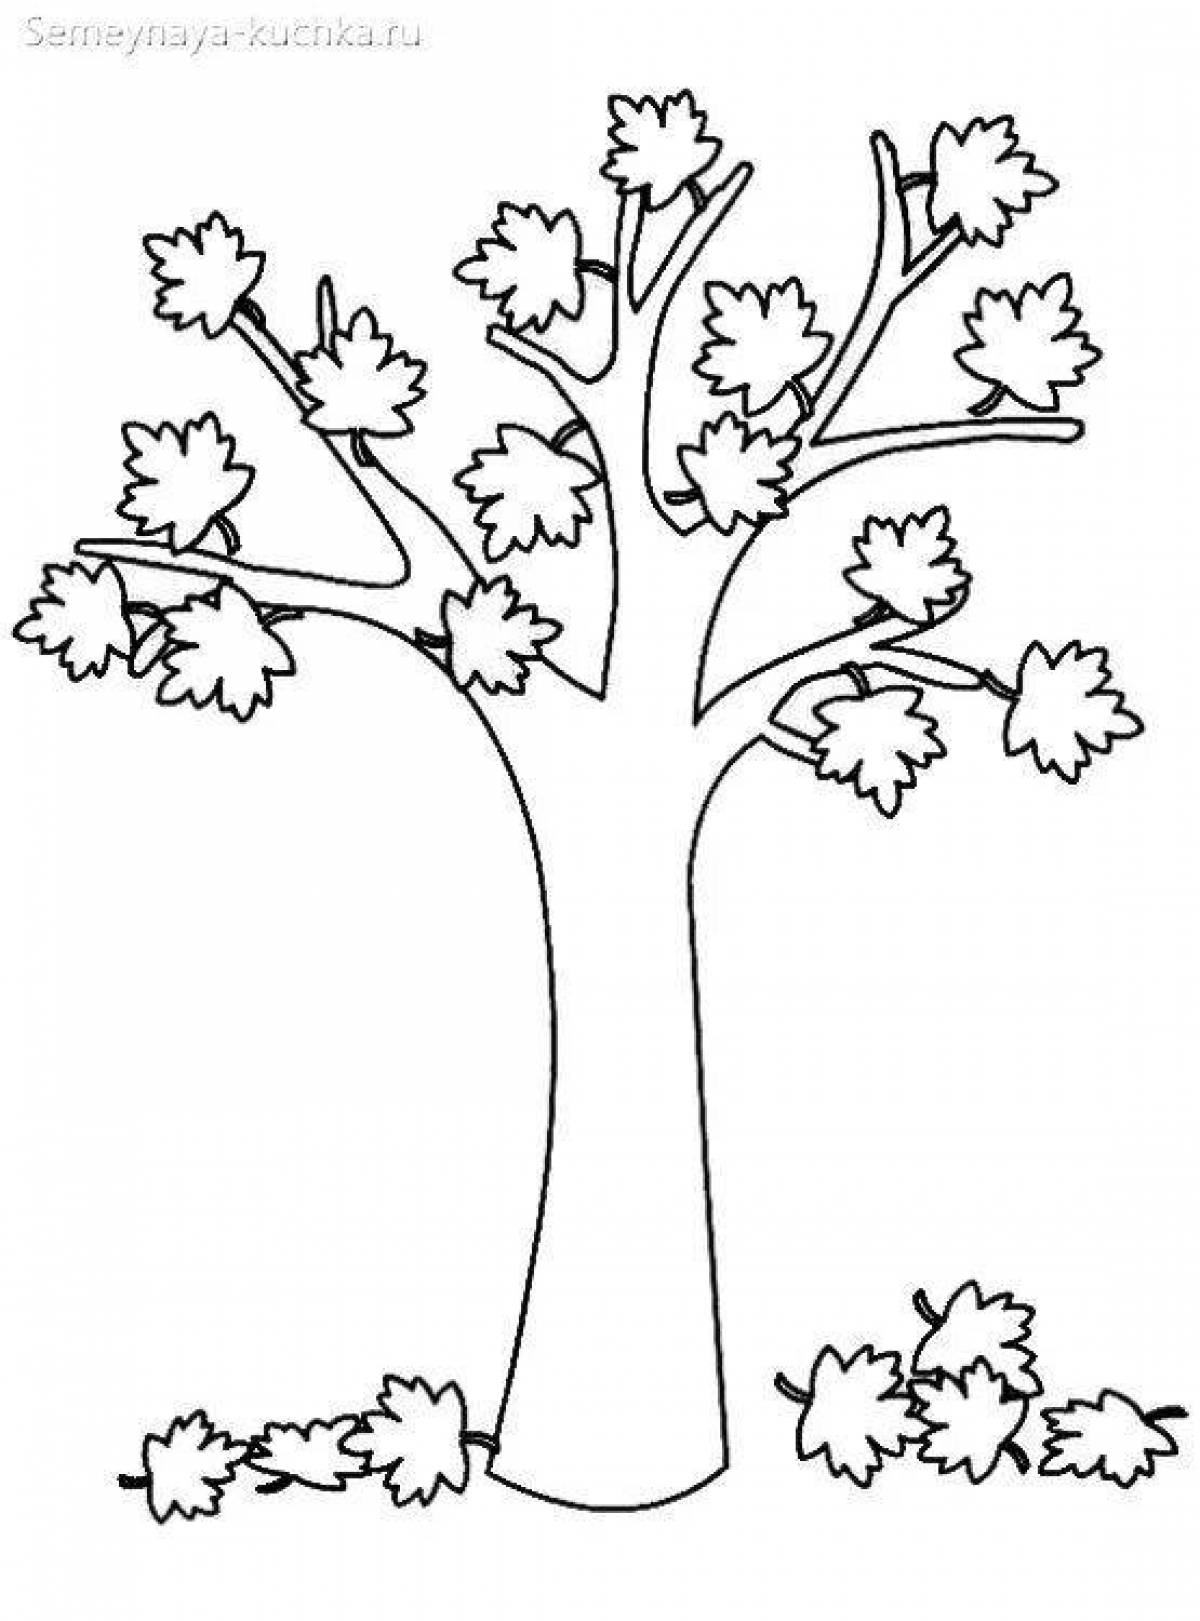 Coloring book with amazing tree pattern